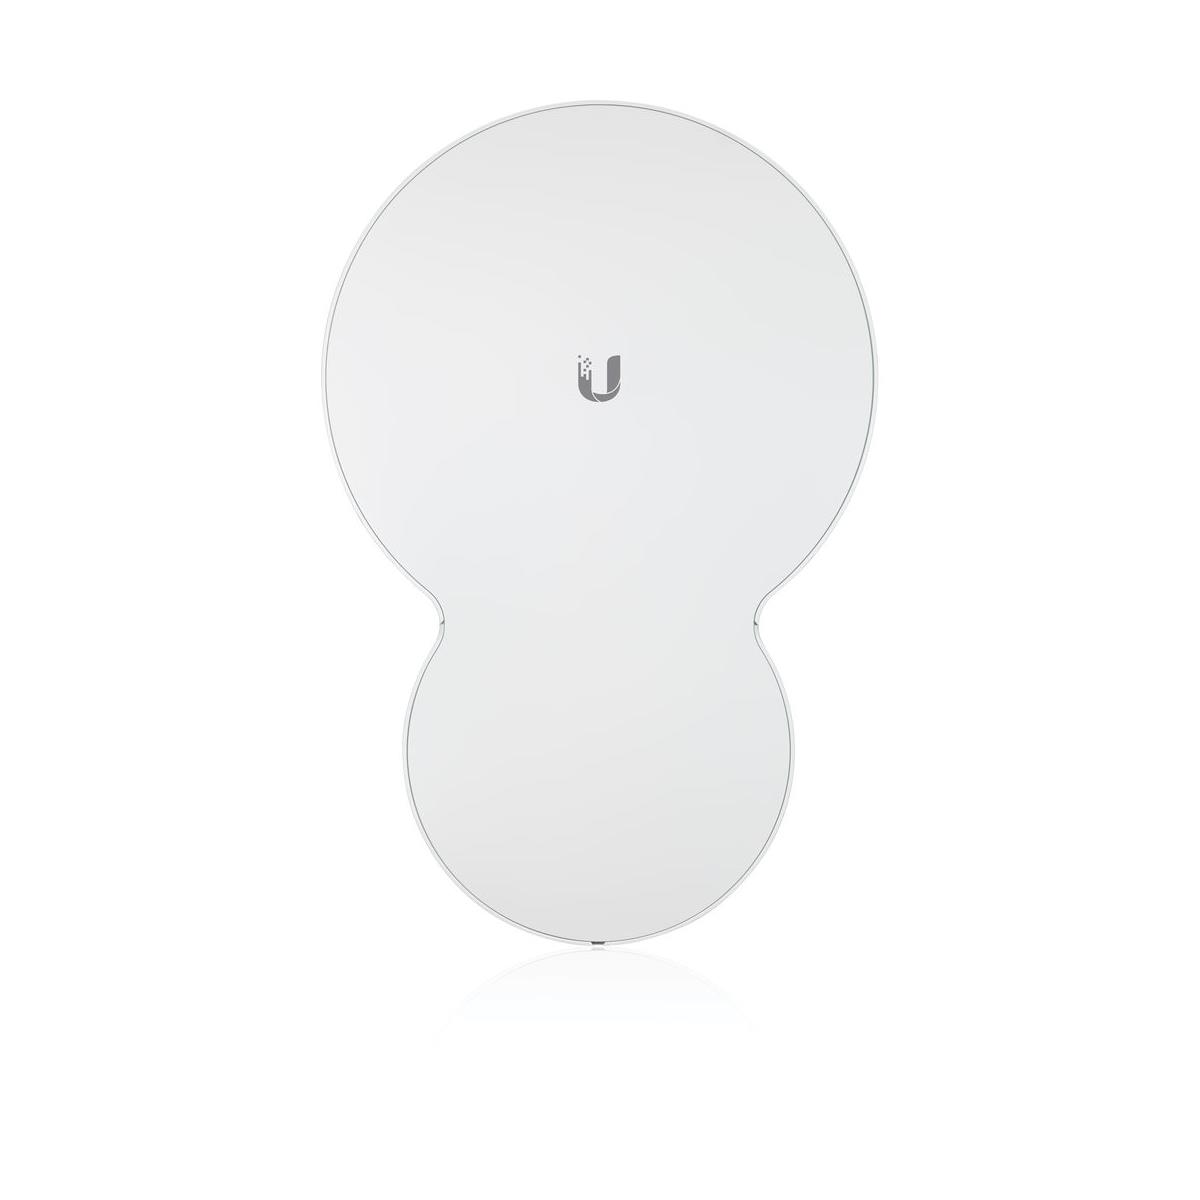 Image of Ubiquiti Networks airFiber 24HD Carrier Class Point-to-Point Gigabit Radio